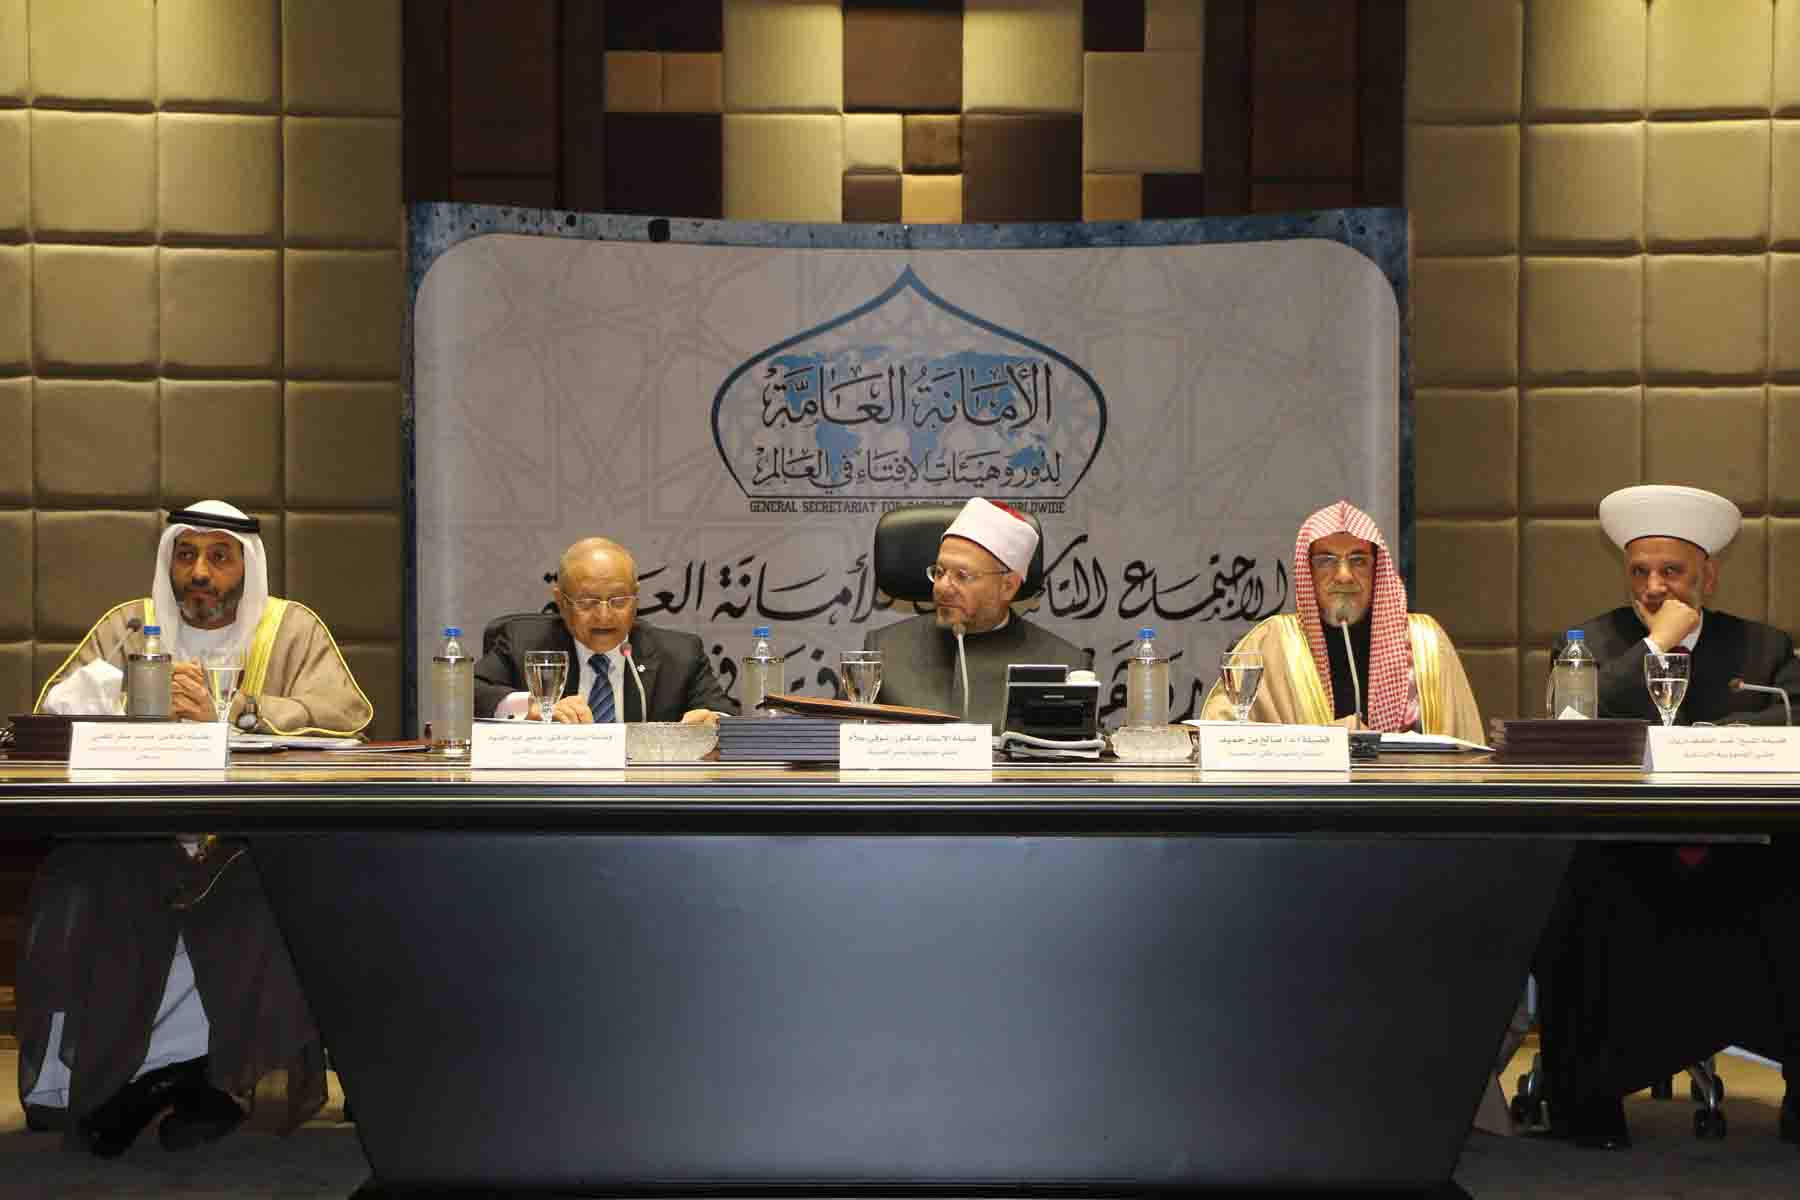 Egypt's Dar al-Ifta announces the establishment of an international academy to train preachers and muftis in fatwa and its sciences.